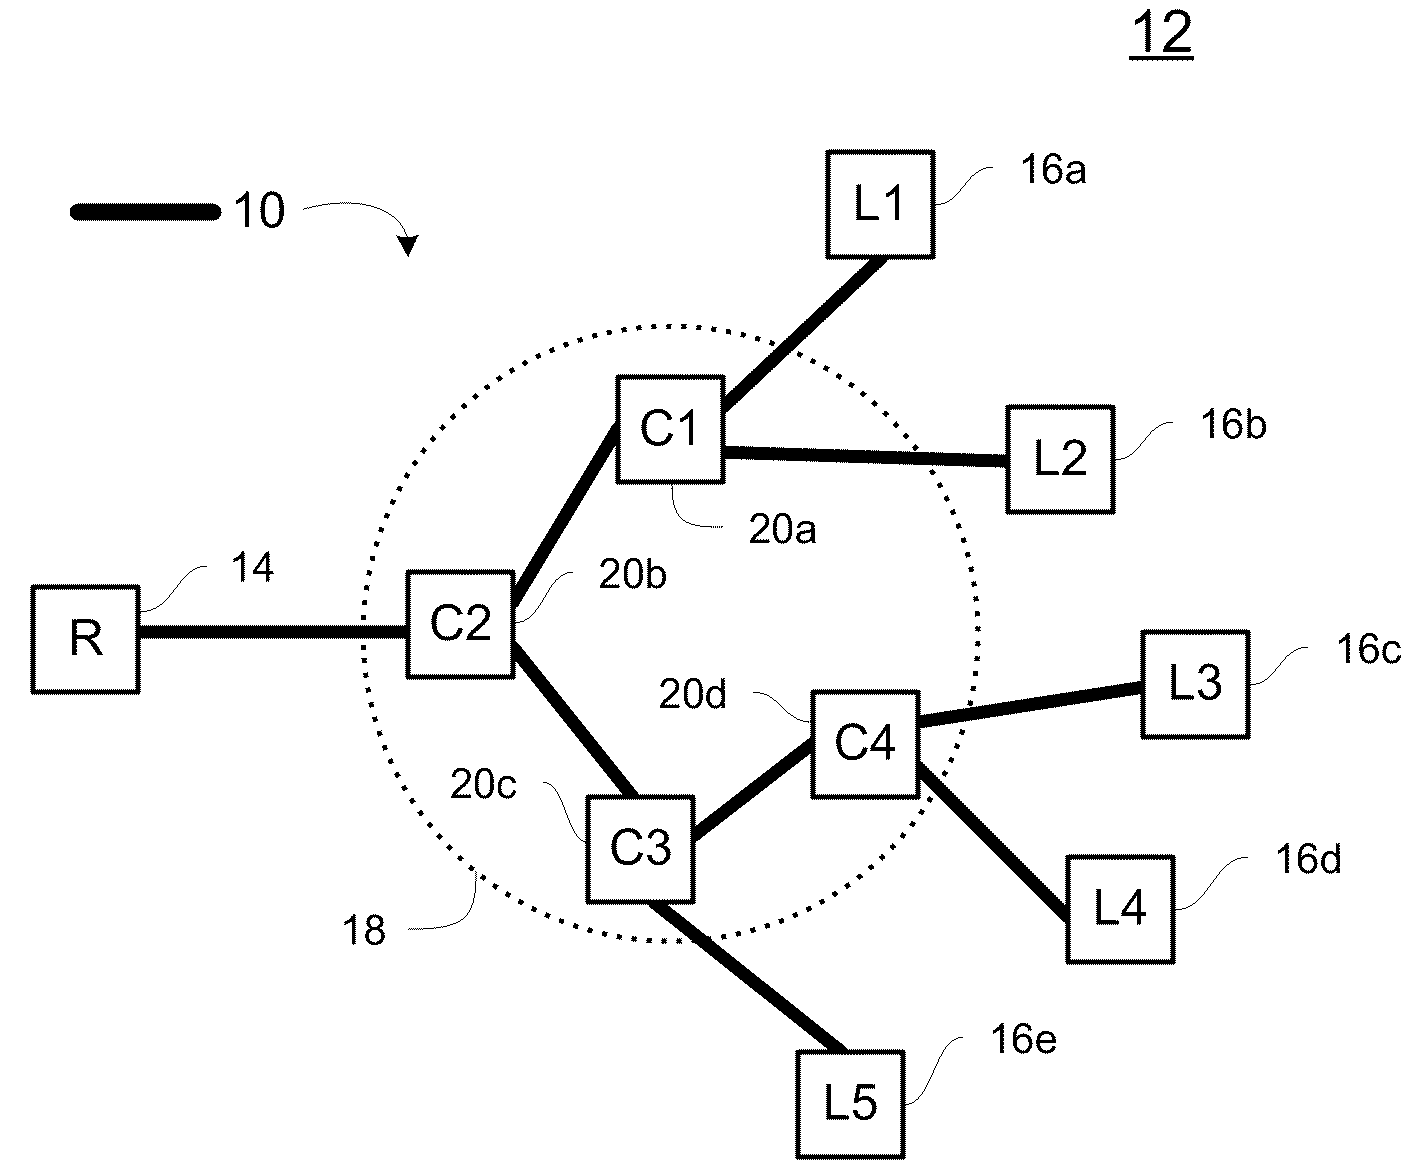 In-band signaling for point-multipoint packet protection switching